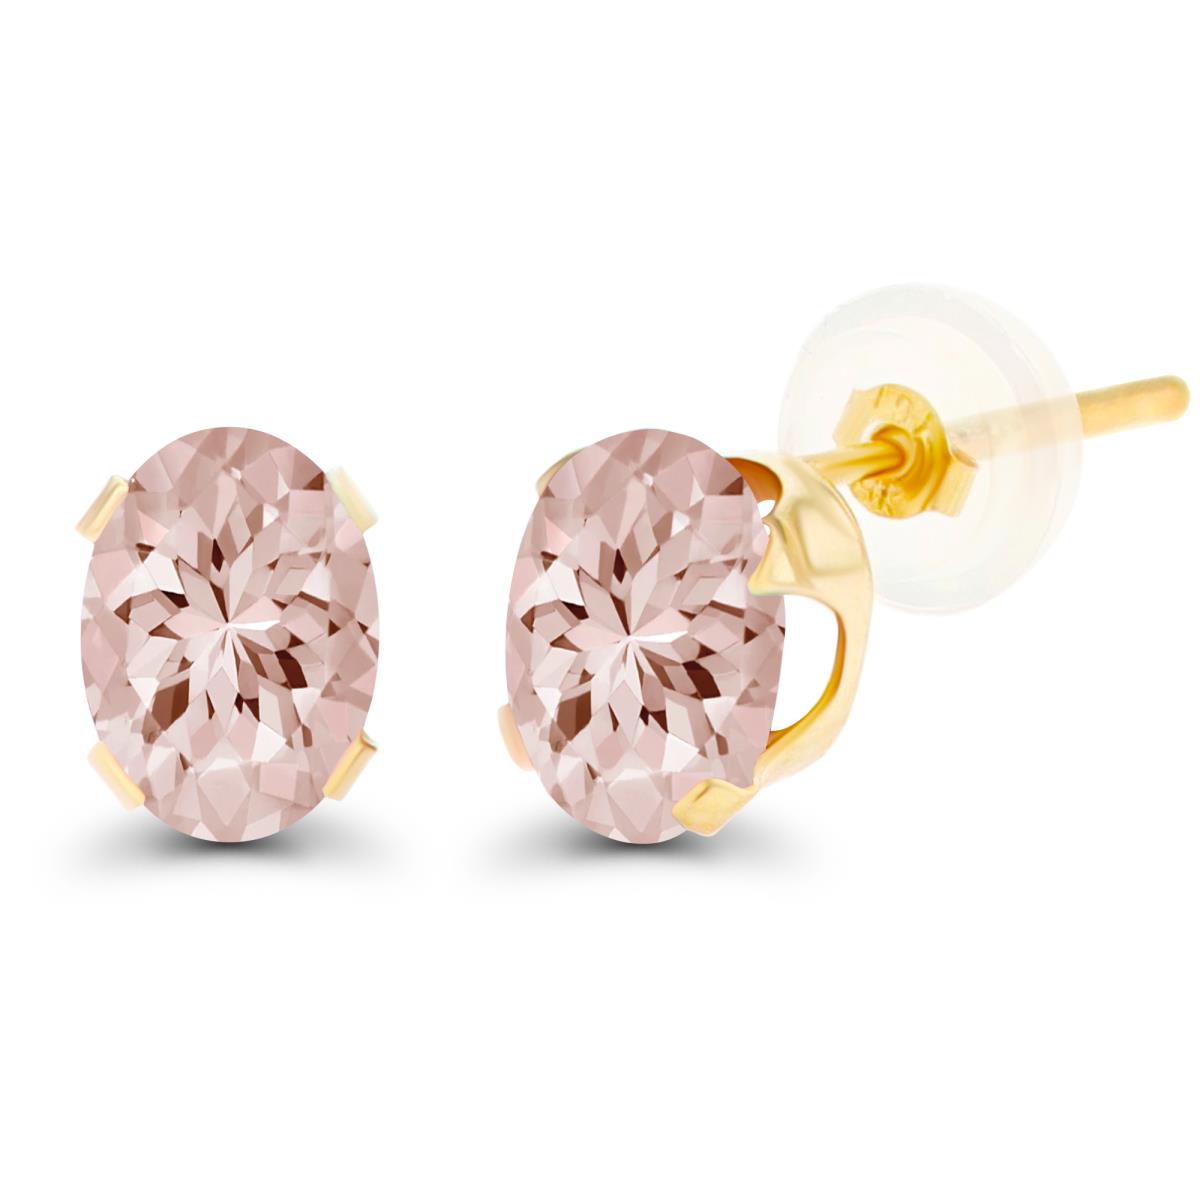 Sterling Silver Yellow 7x5mm Oval Morganite Stud Earring with Clutch